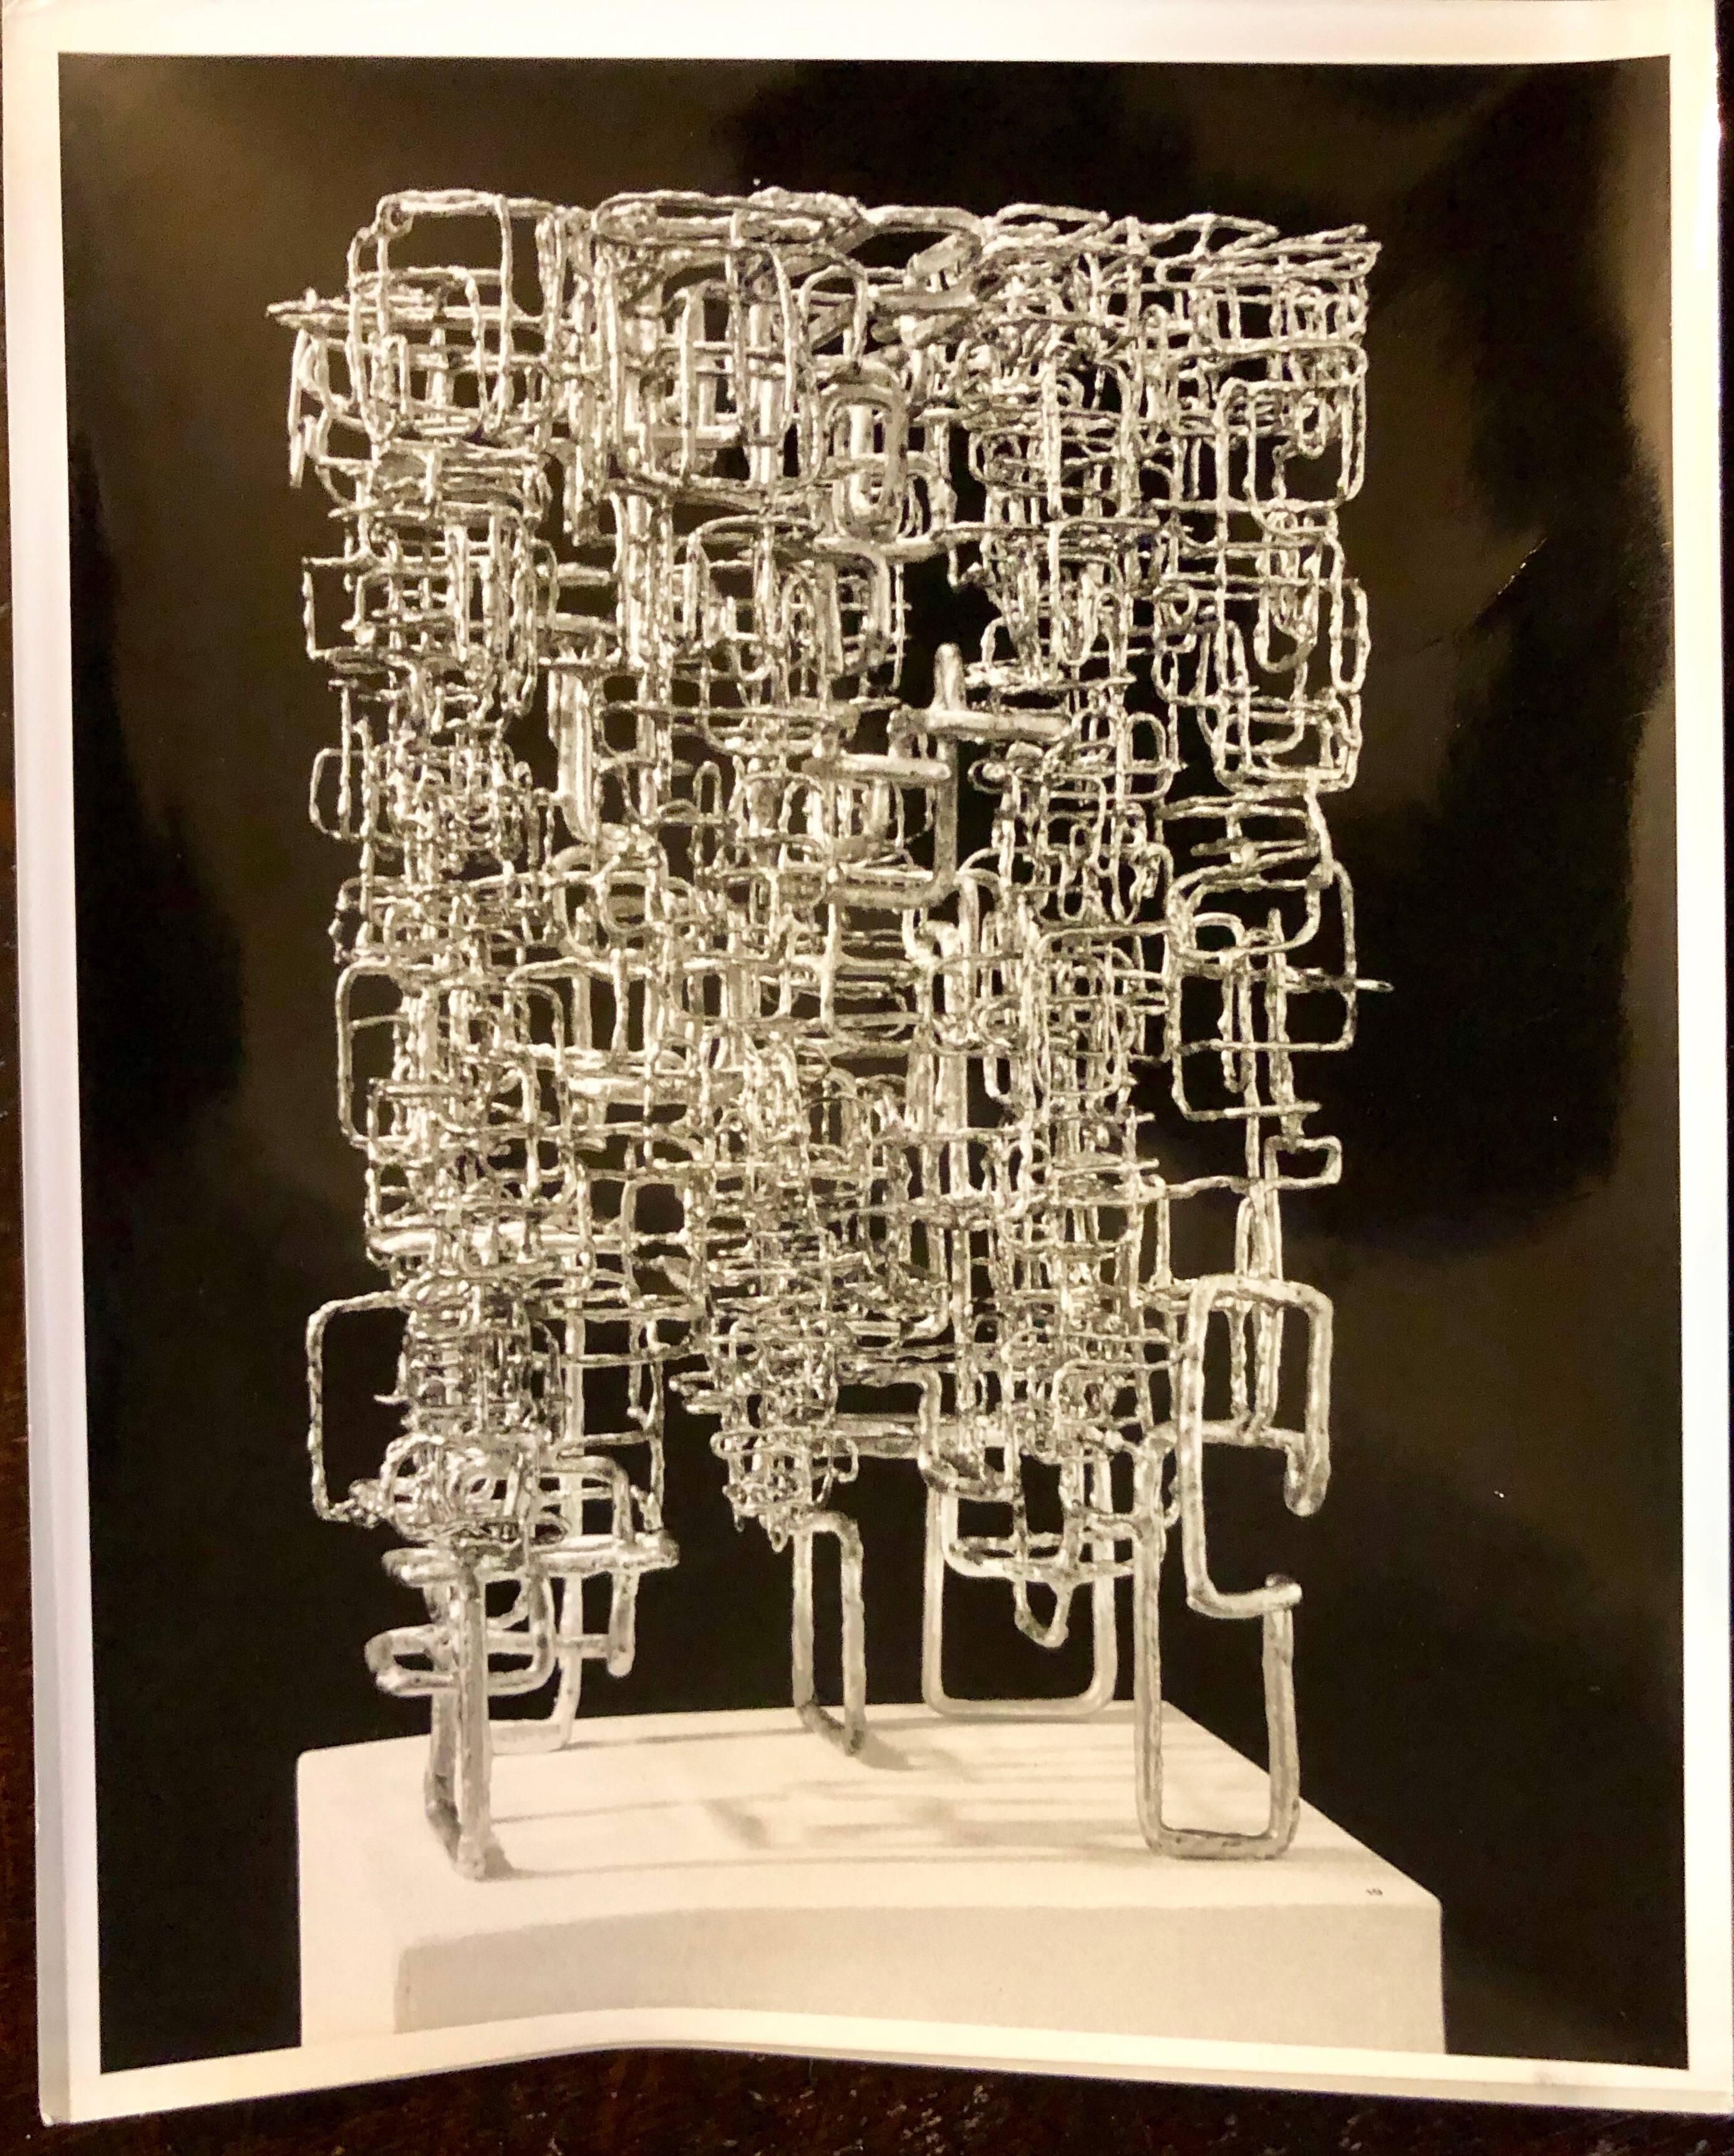 Unknown Black and White Photograph - Vintage Silver Gelatin Photo of Ibram Lassaw Modernist Sculpture (Photograph)